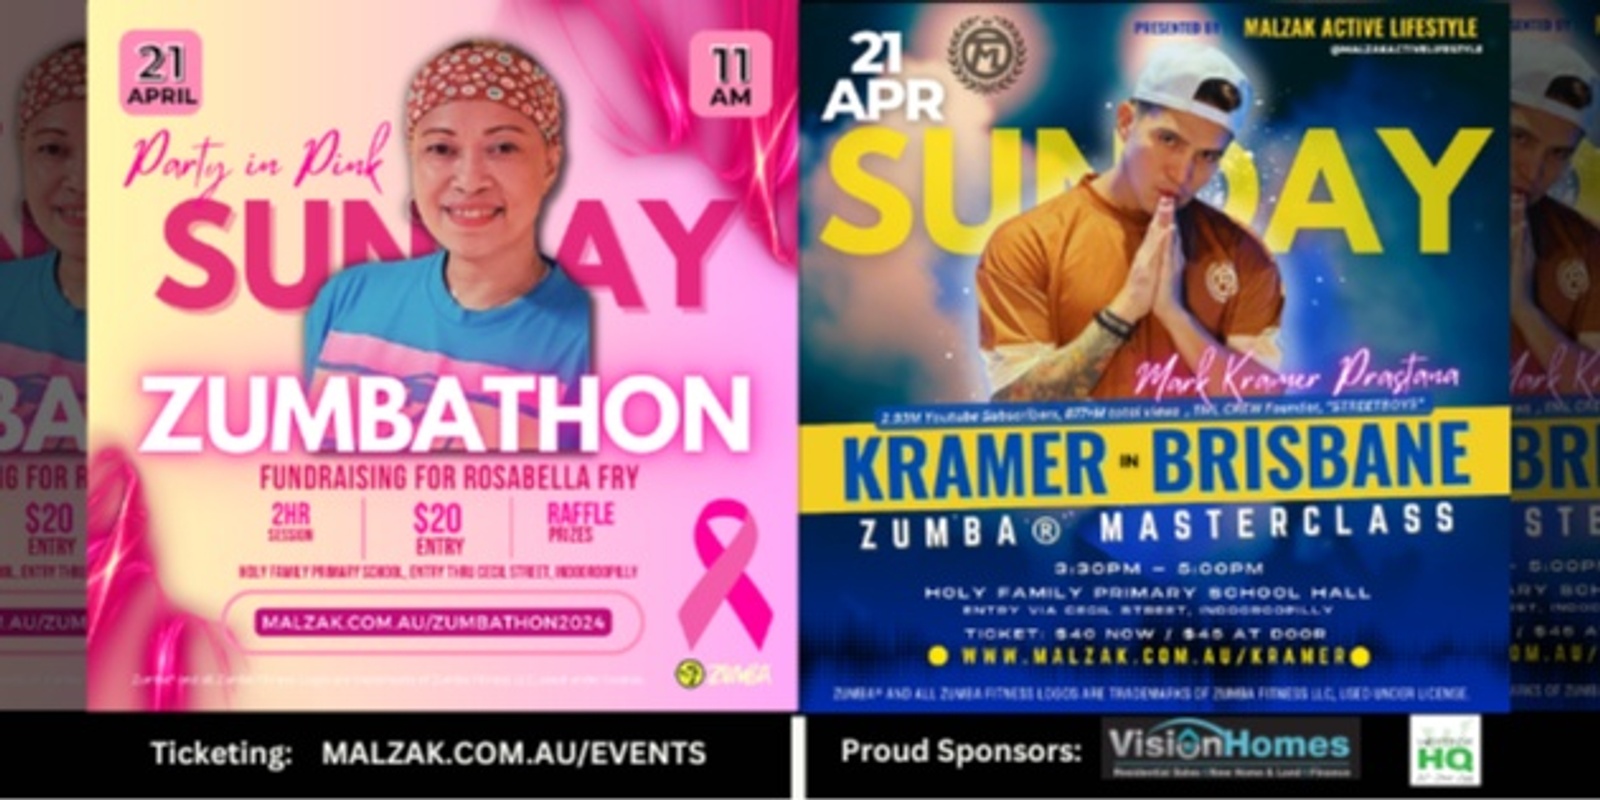 Banner image for Kramer in Brisbane Zumba Masterclass and Zumbathon Fundraising Party in Pink  - Sun 21Apr 2024